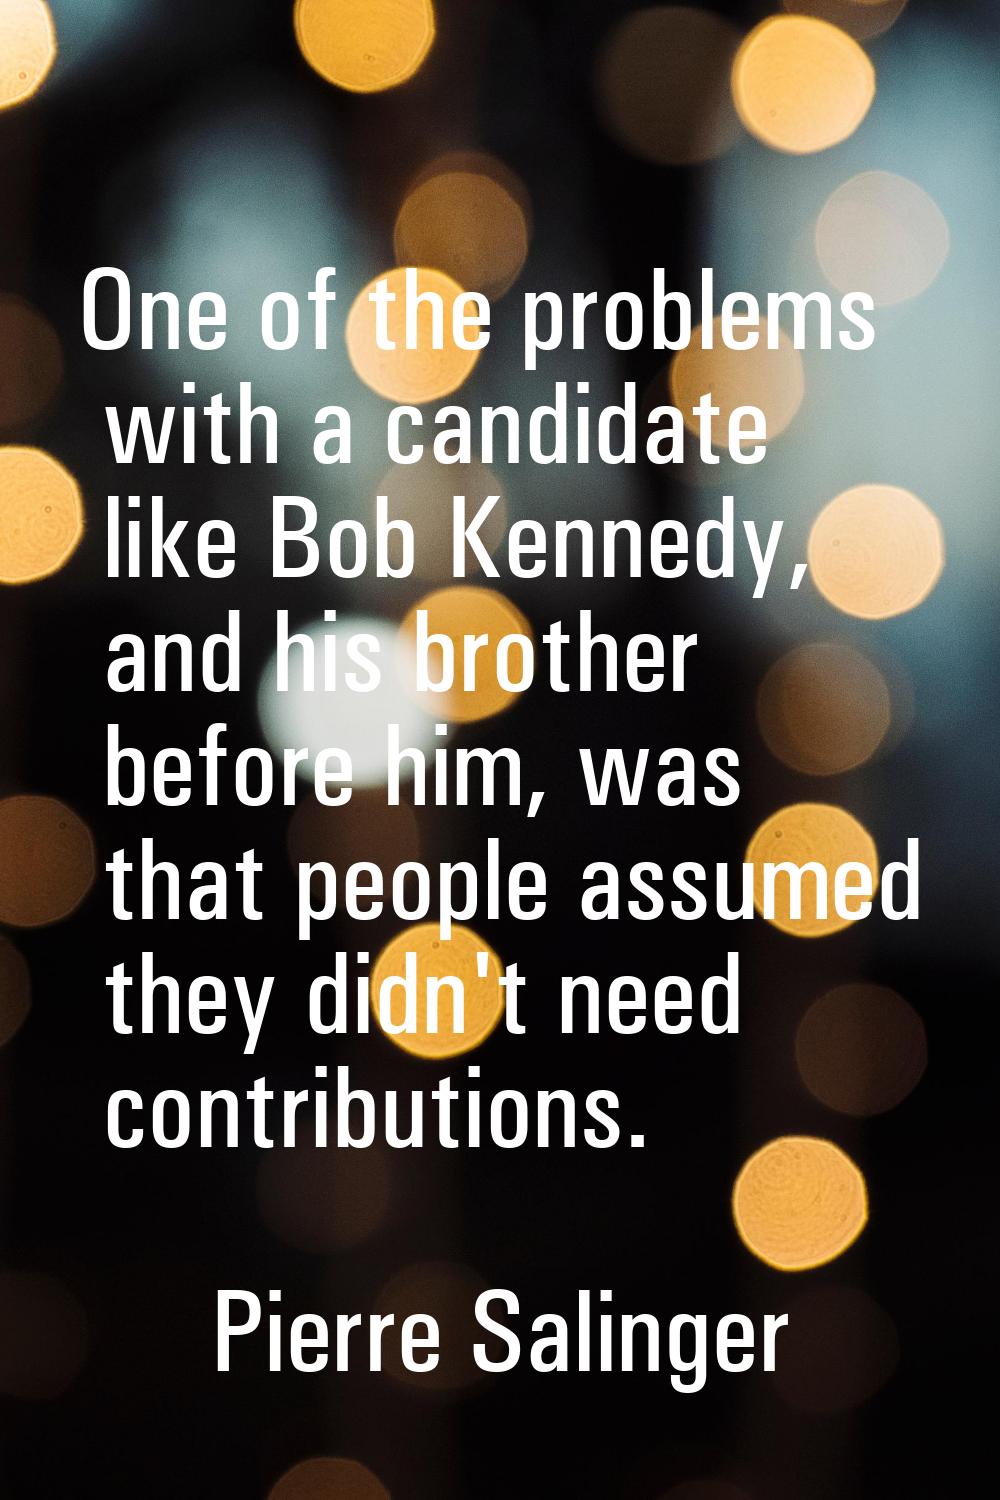 One of the problems with a candidate like Bob Kennedy, and his brother before him, was that people 